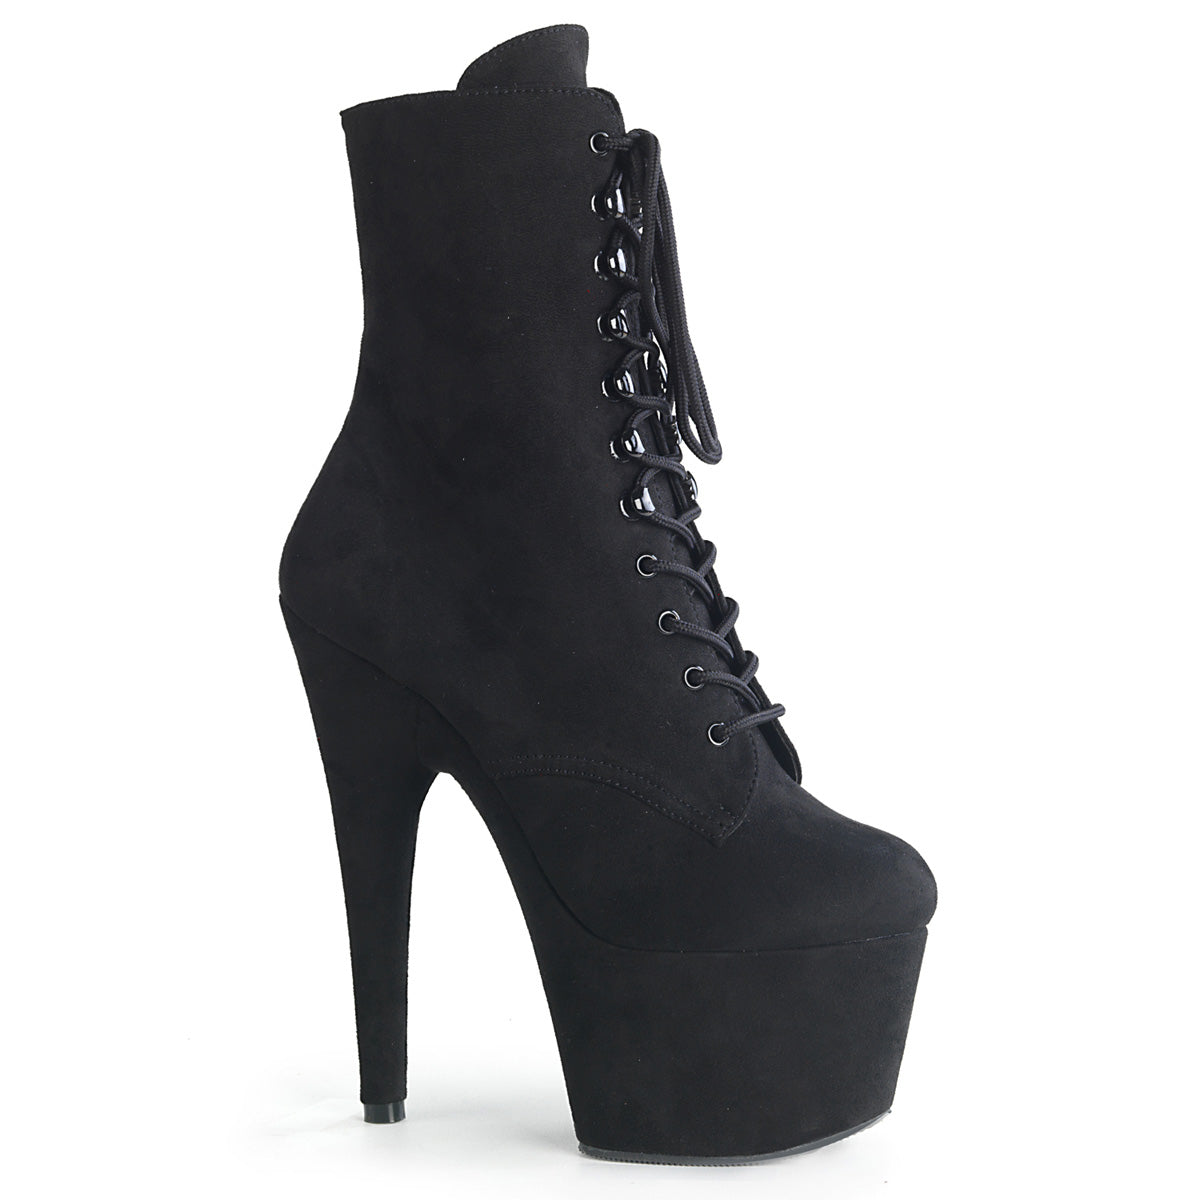 ADORE-1020FS Pleaser 7" Heel Black Exotic Dancing Ankle Boot-Pleaser- Sexy Shoes